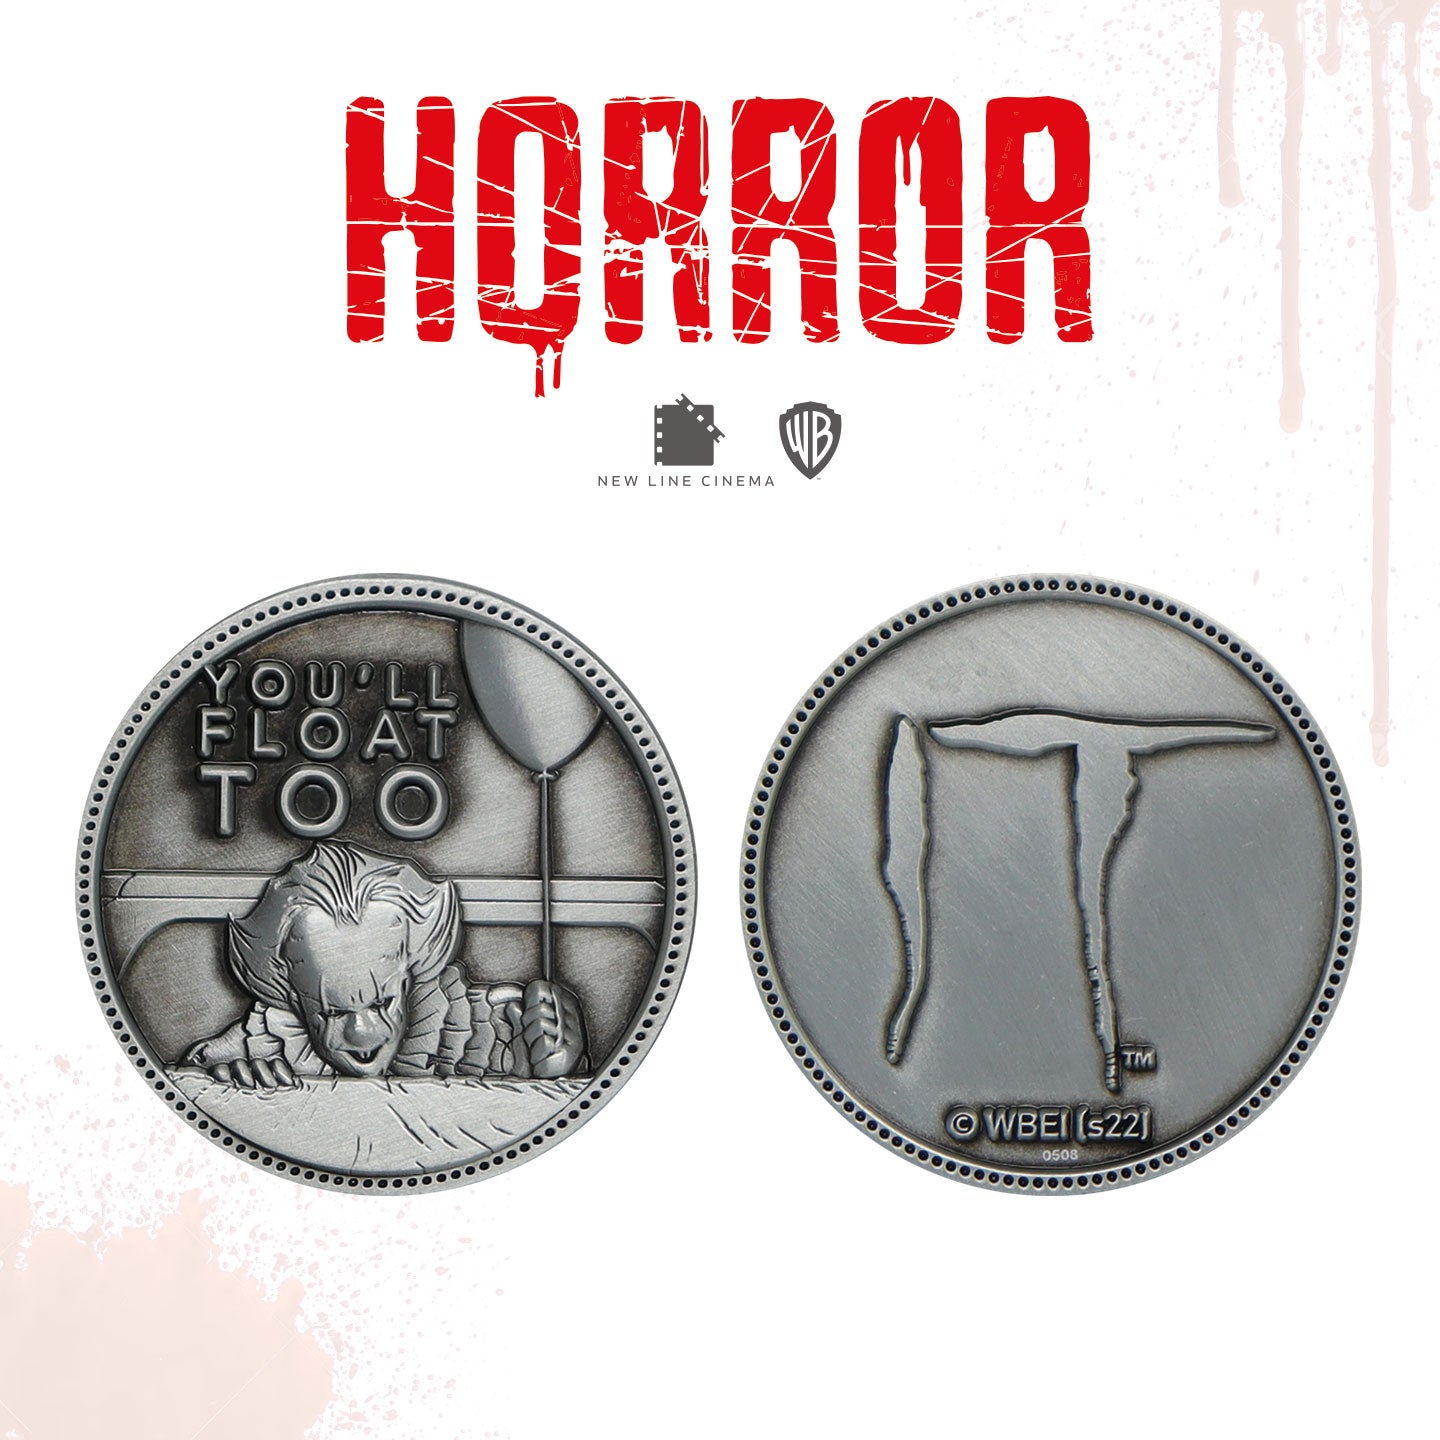 IT Limited Edition Collectible Coin